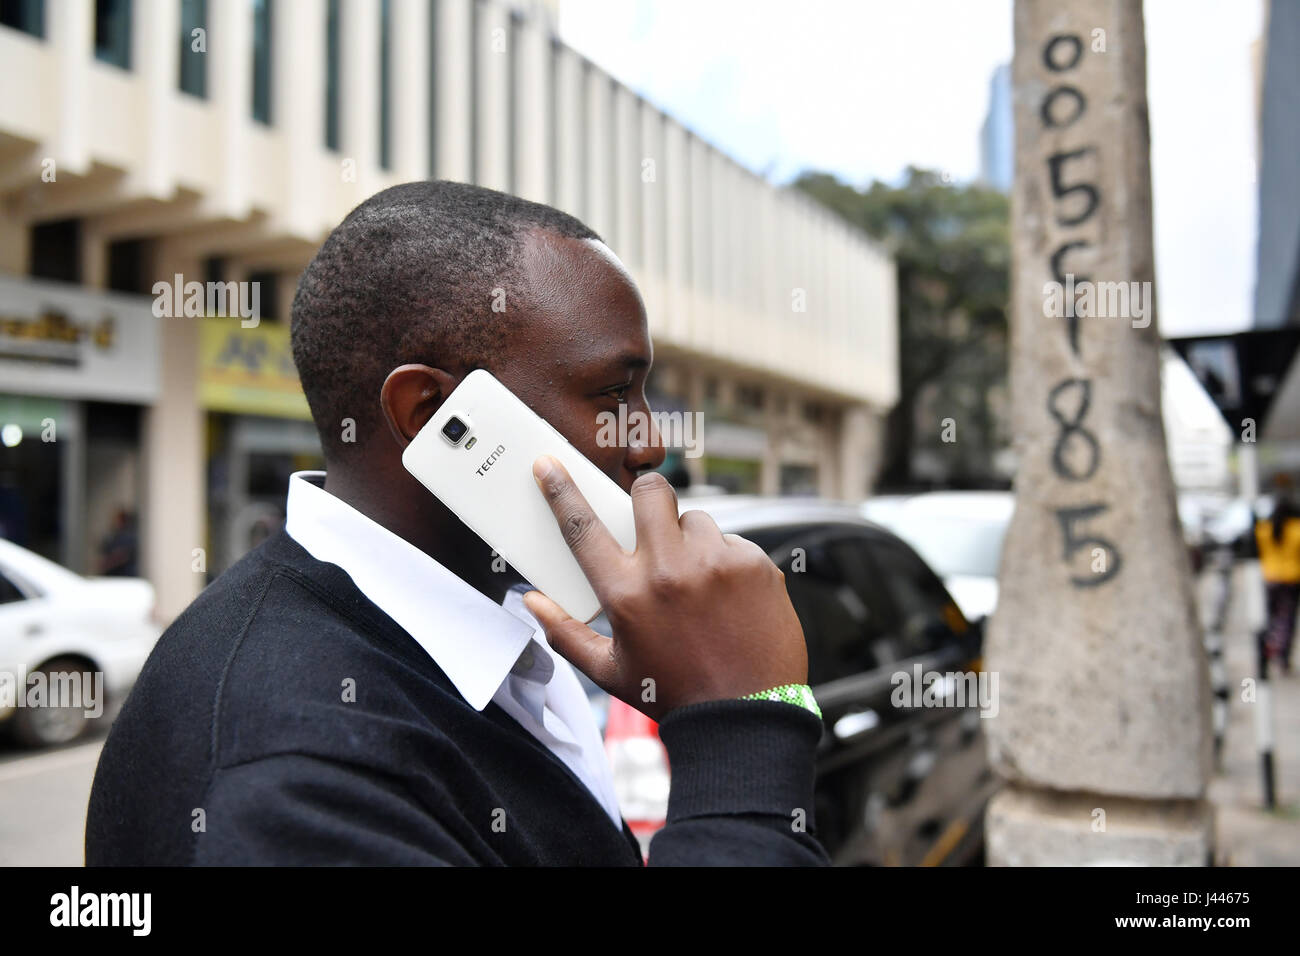 (170510) -- NAIROBI, May 10, 2017(Xinhua) -- A man uses Tecno mobile phone in downtown Nairobi, capital of Kenya, May 9, 2017. Chinese mobile phone manufacturer Tecno Mobile sales reached 25 million devices, including 9 million smartphones in 2015, helping it to sustain the most 'popular' brand status in Africa. (Xinhua/Sun Ruibo) (jmmn) Stock Photo